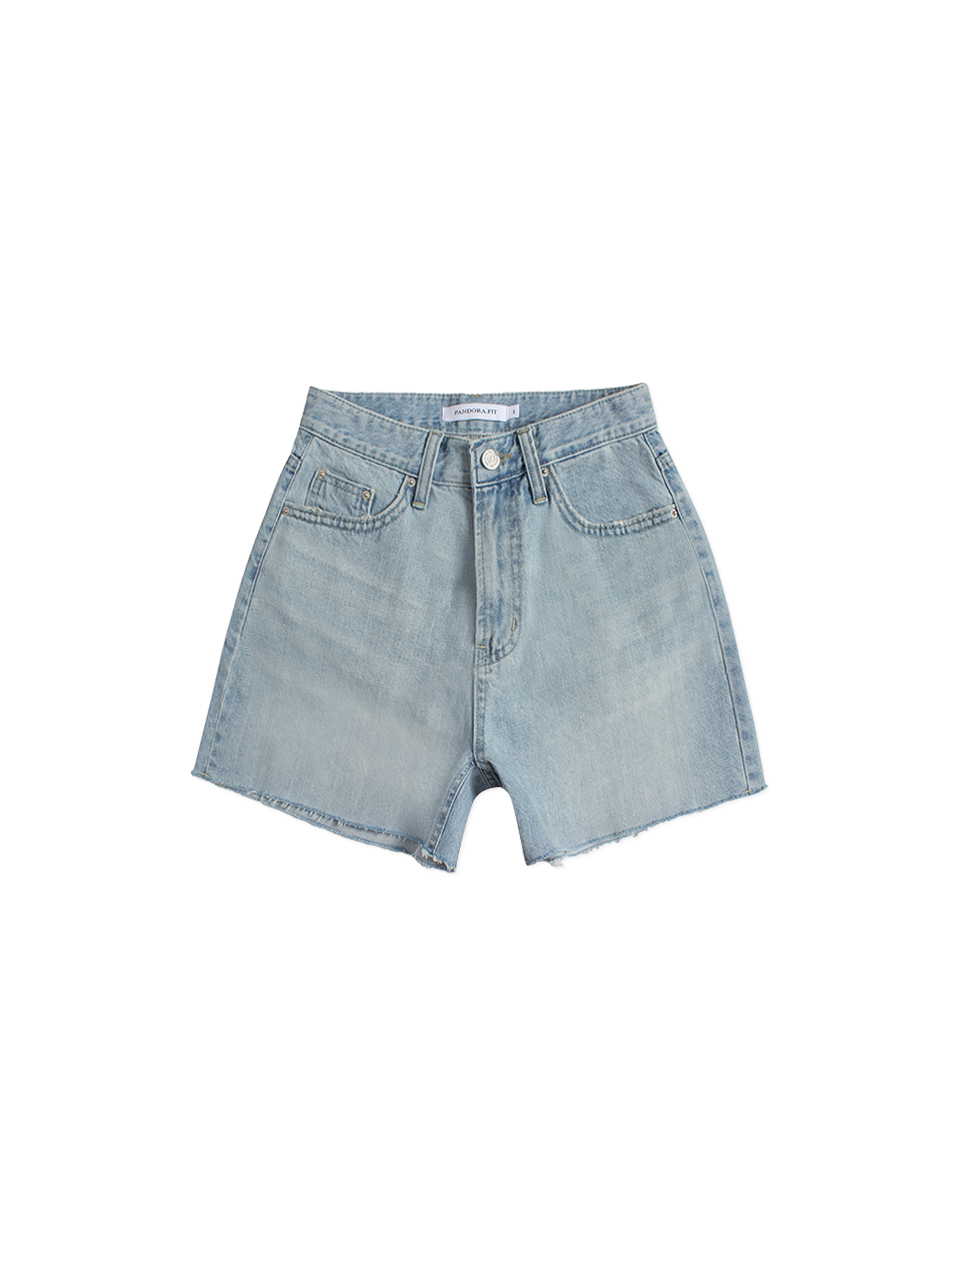 [SHORTS] Lily Jeans